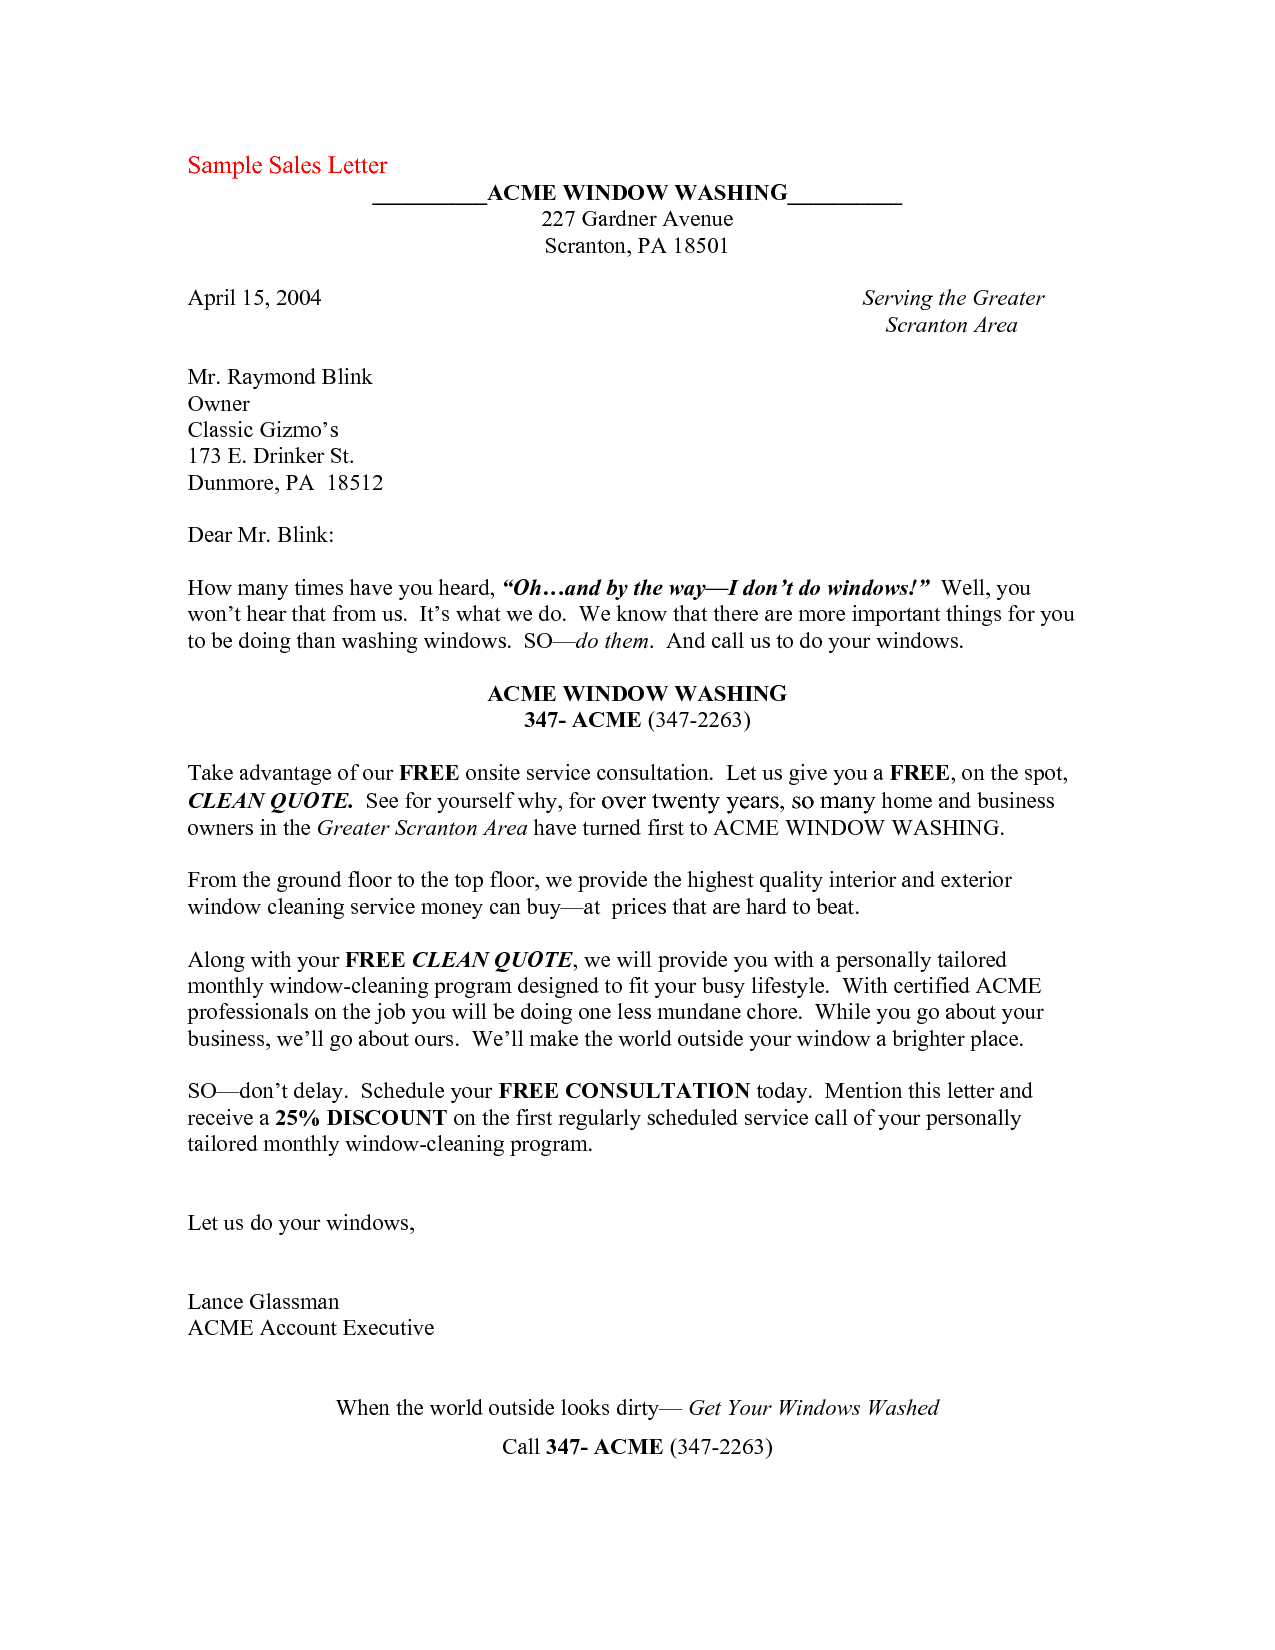 Direct Mail Letter Template - How to Write A Sales Letter Example Letter format formal Sample